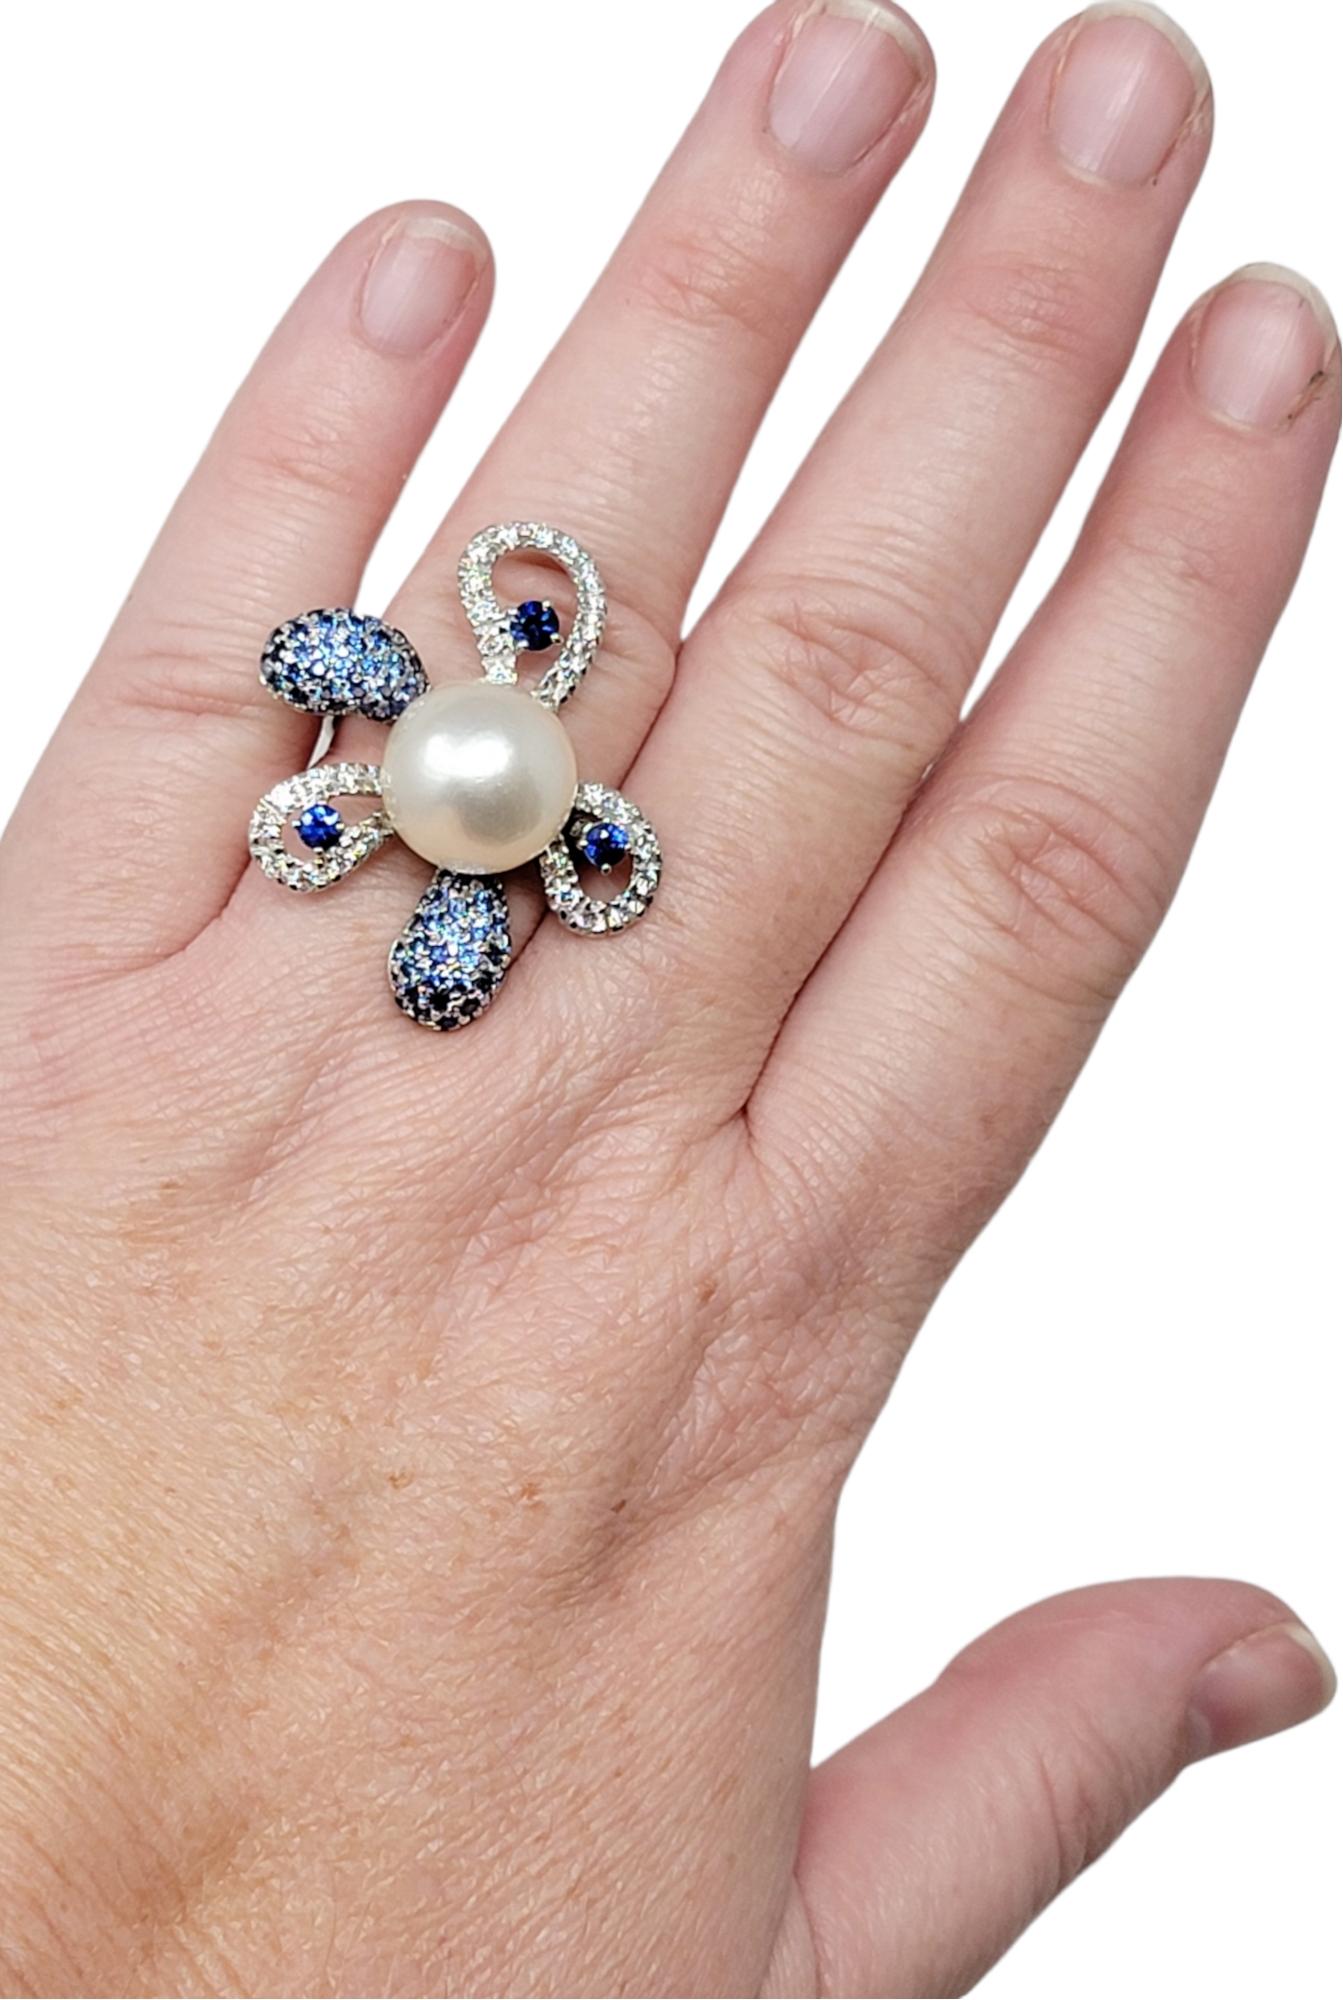 South Sea Cultured Pearl Flower Cocktail Ring with Diamond and Sapphire Petals For Sale 7